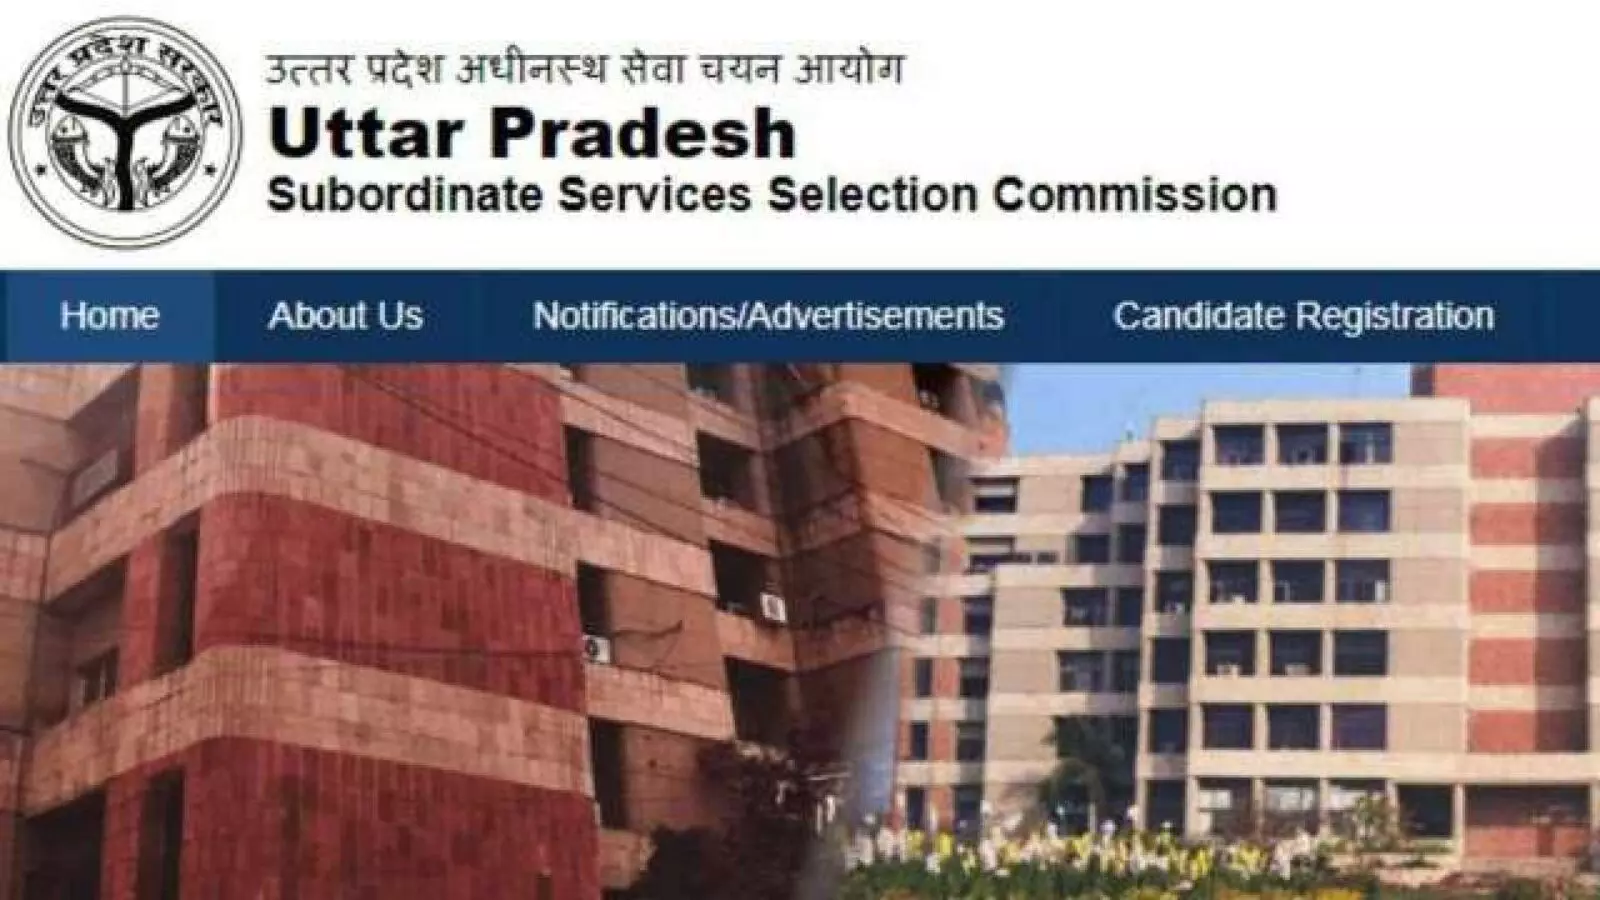 UPSSSC Recruitment 2022 eligibility criteria age limit qualification admit card apply from 17 on upsssc gov in